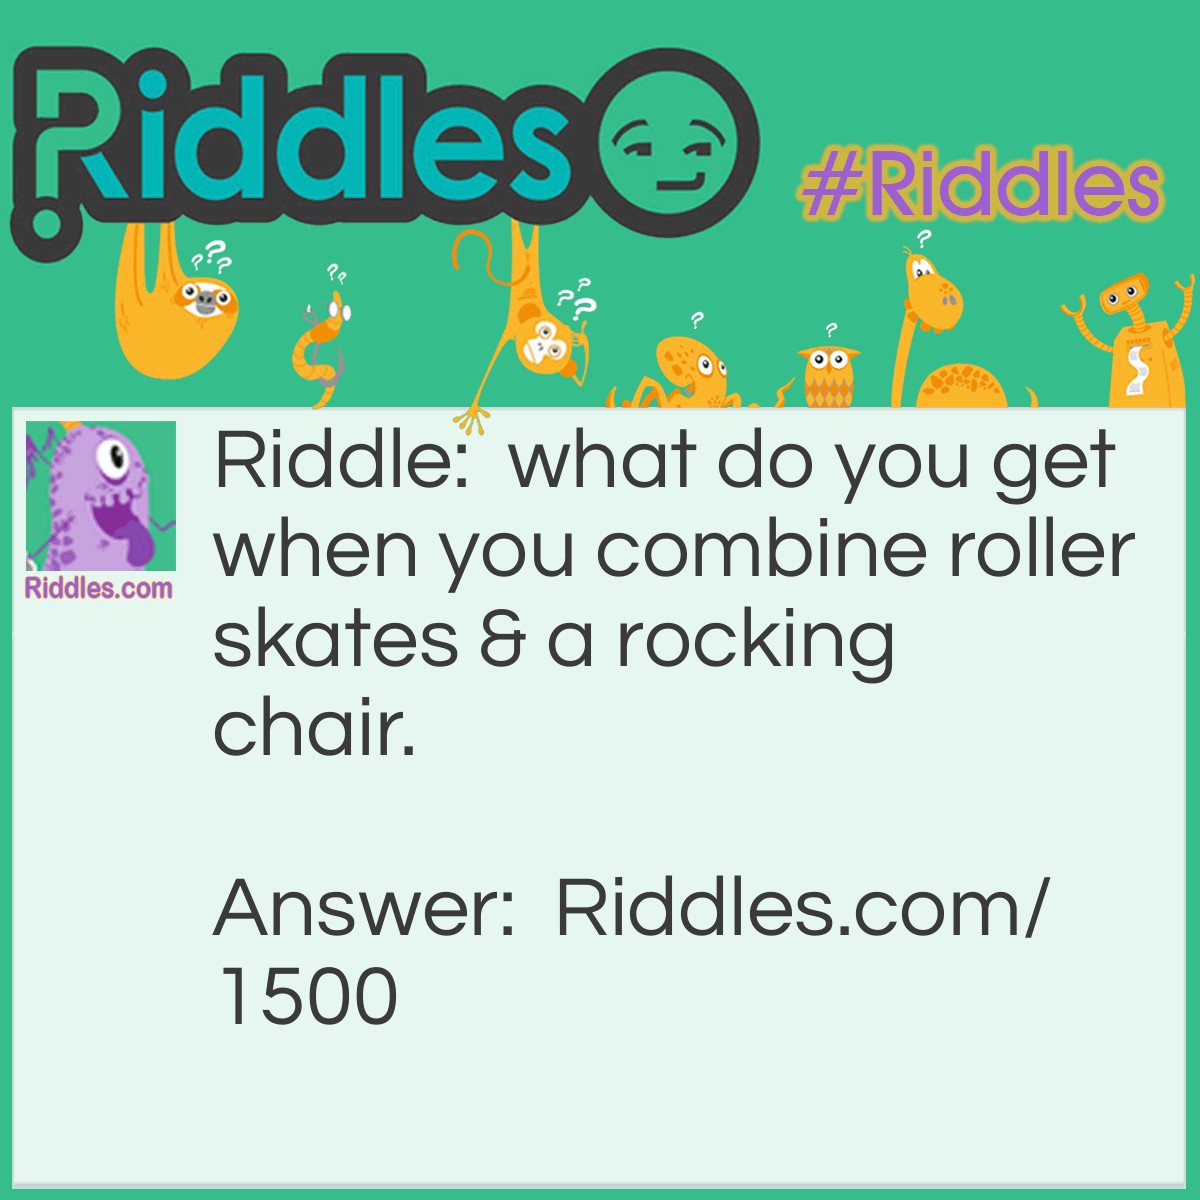 Riddle: What do you get when you combine roller skates & a rocking chair? Answer: Rock N roll.